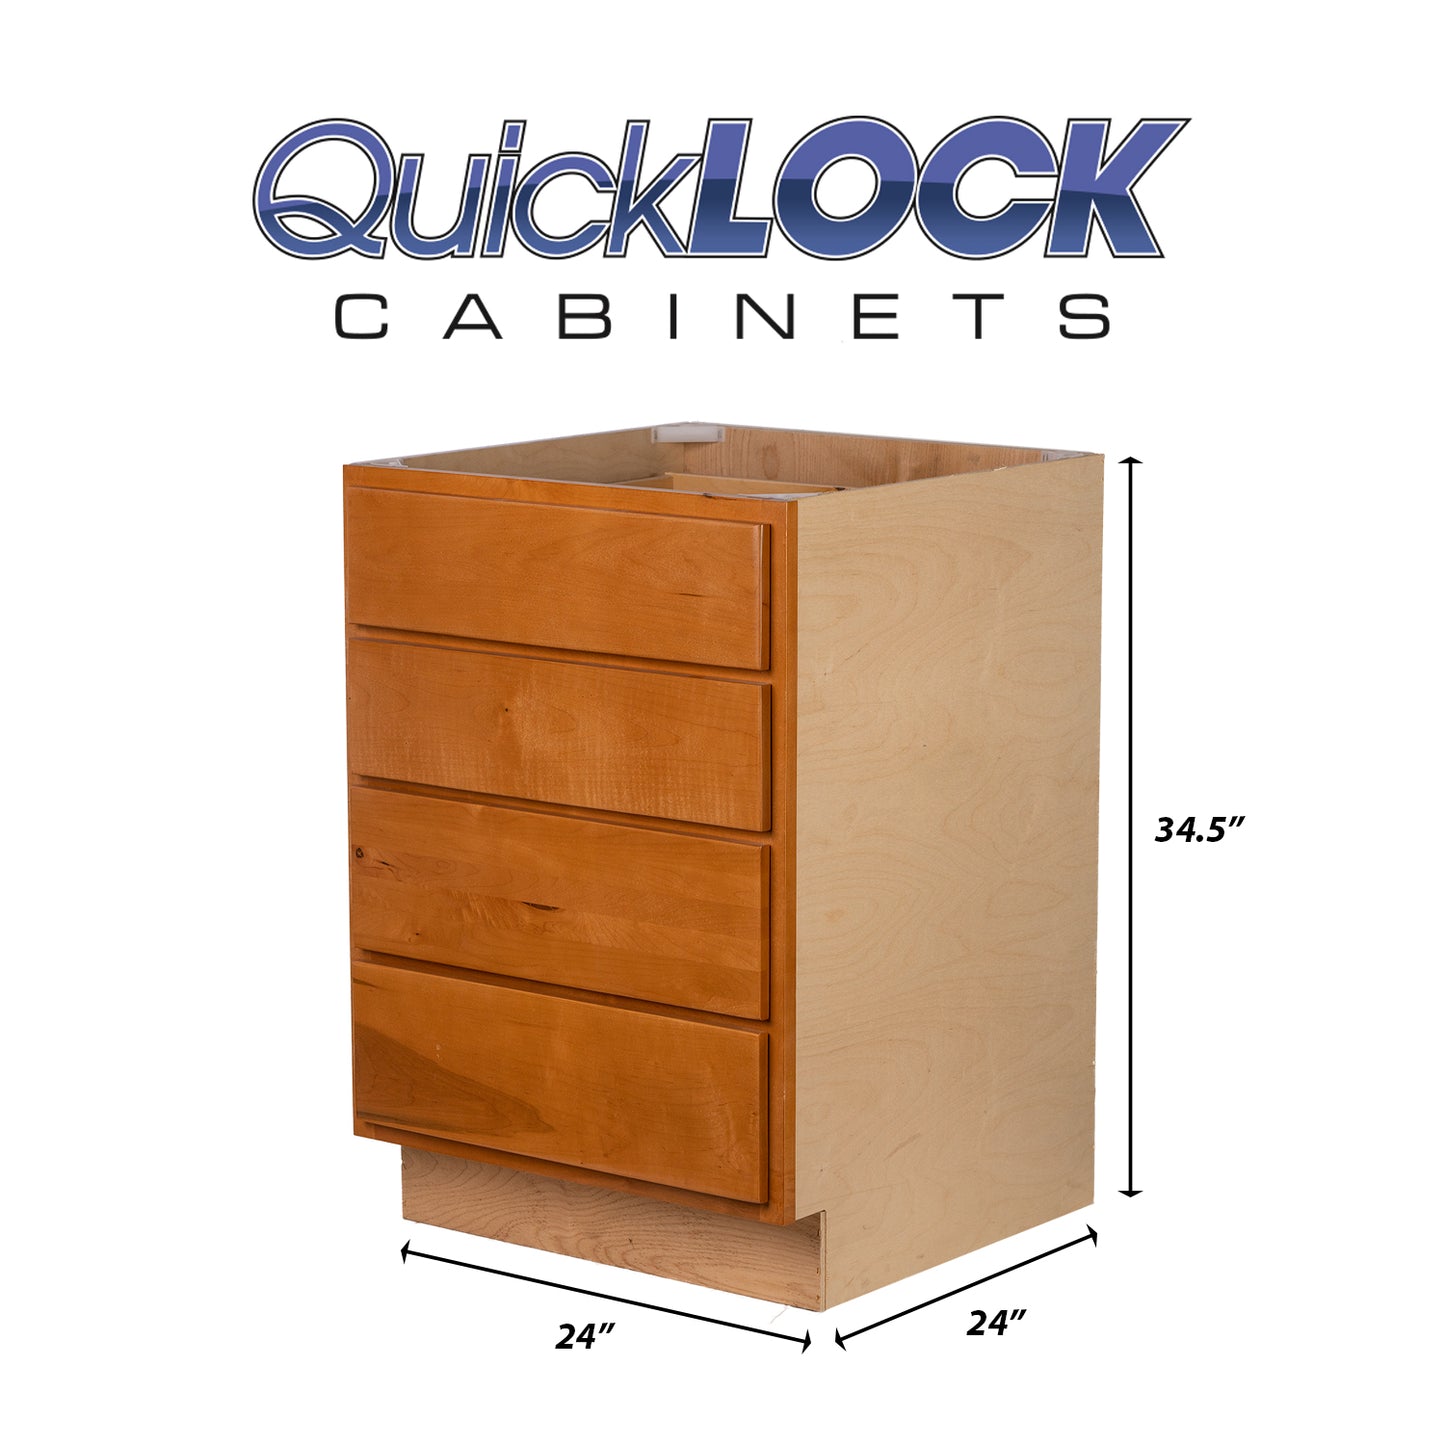 Quicklock RTA (Ready-to-Assemble) Provincial Stain 4 Drawer 24" Base Cabinet | 24"Wx34.5"Hx24"D